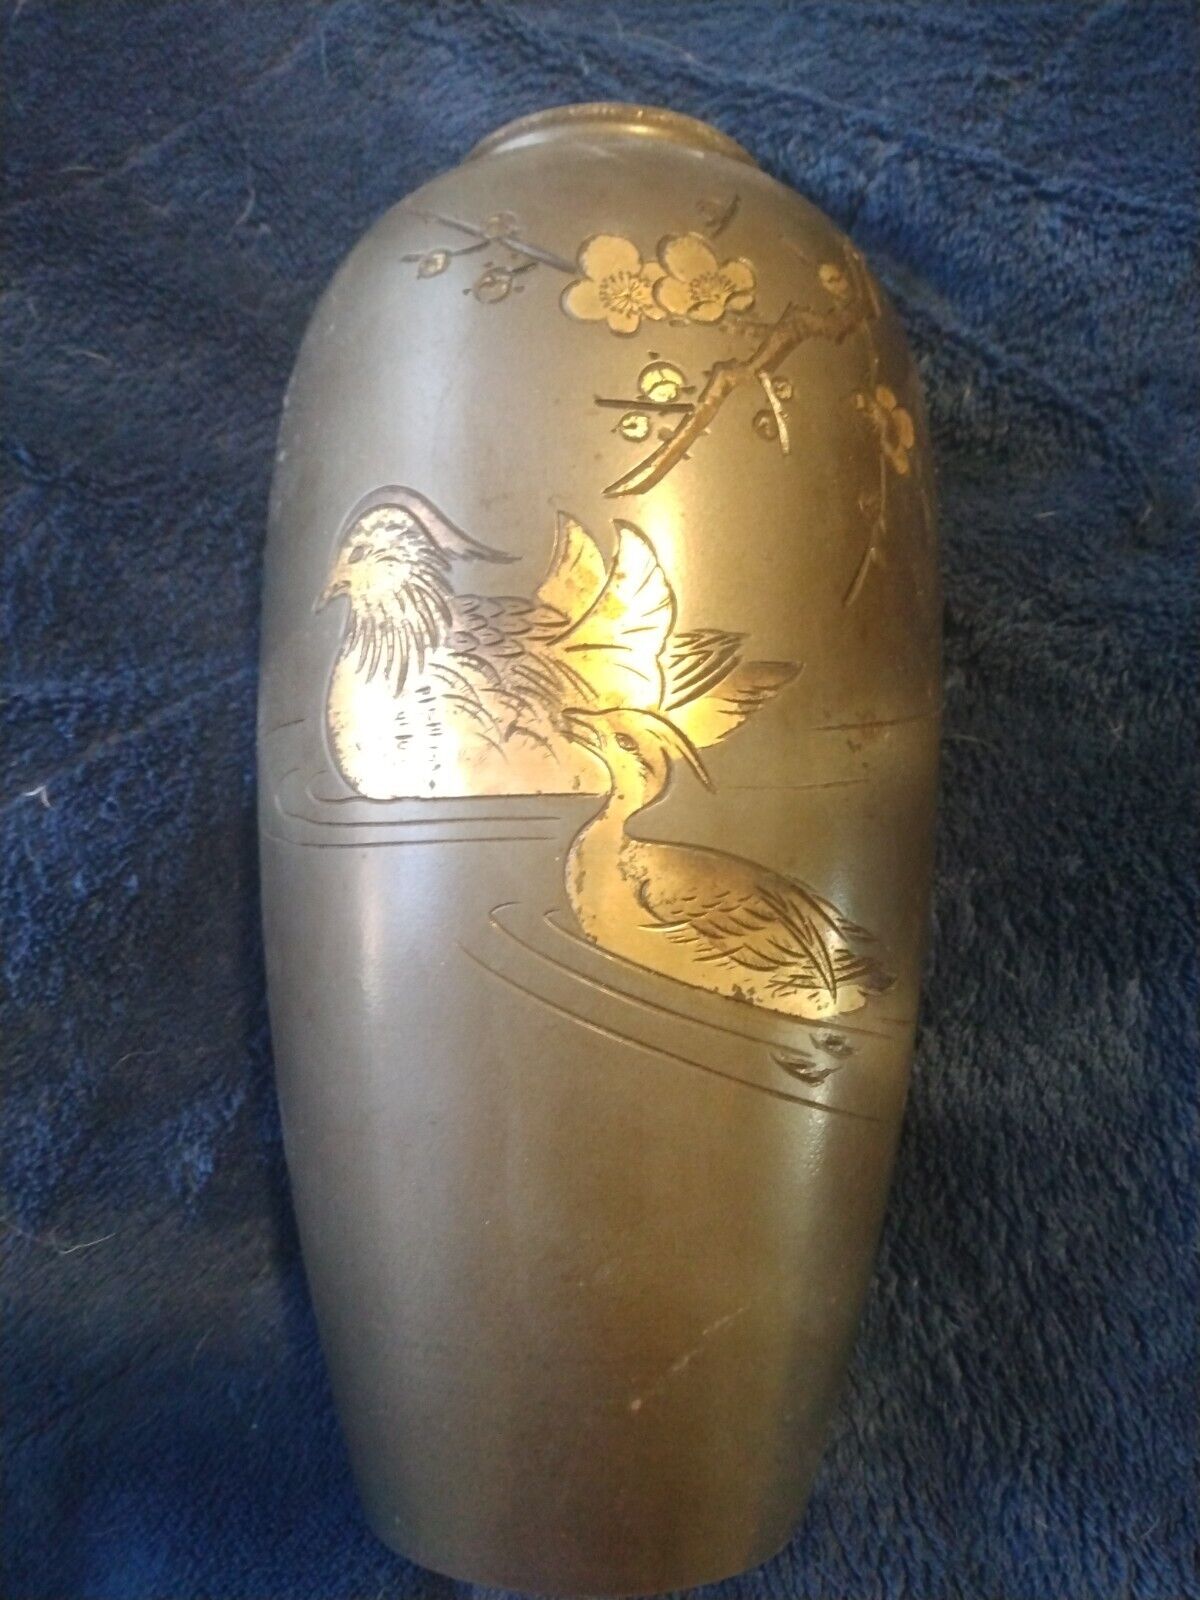 Hand crafted One of a kind vase. Made in occupied Japan. Rare vintage